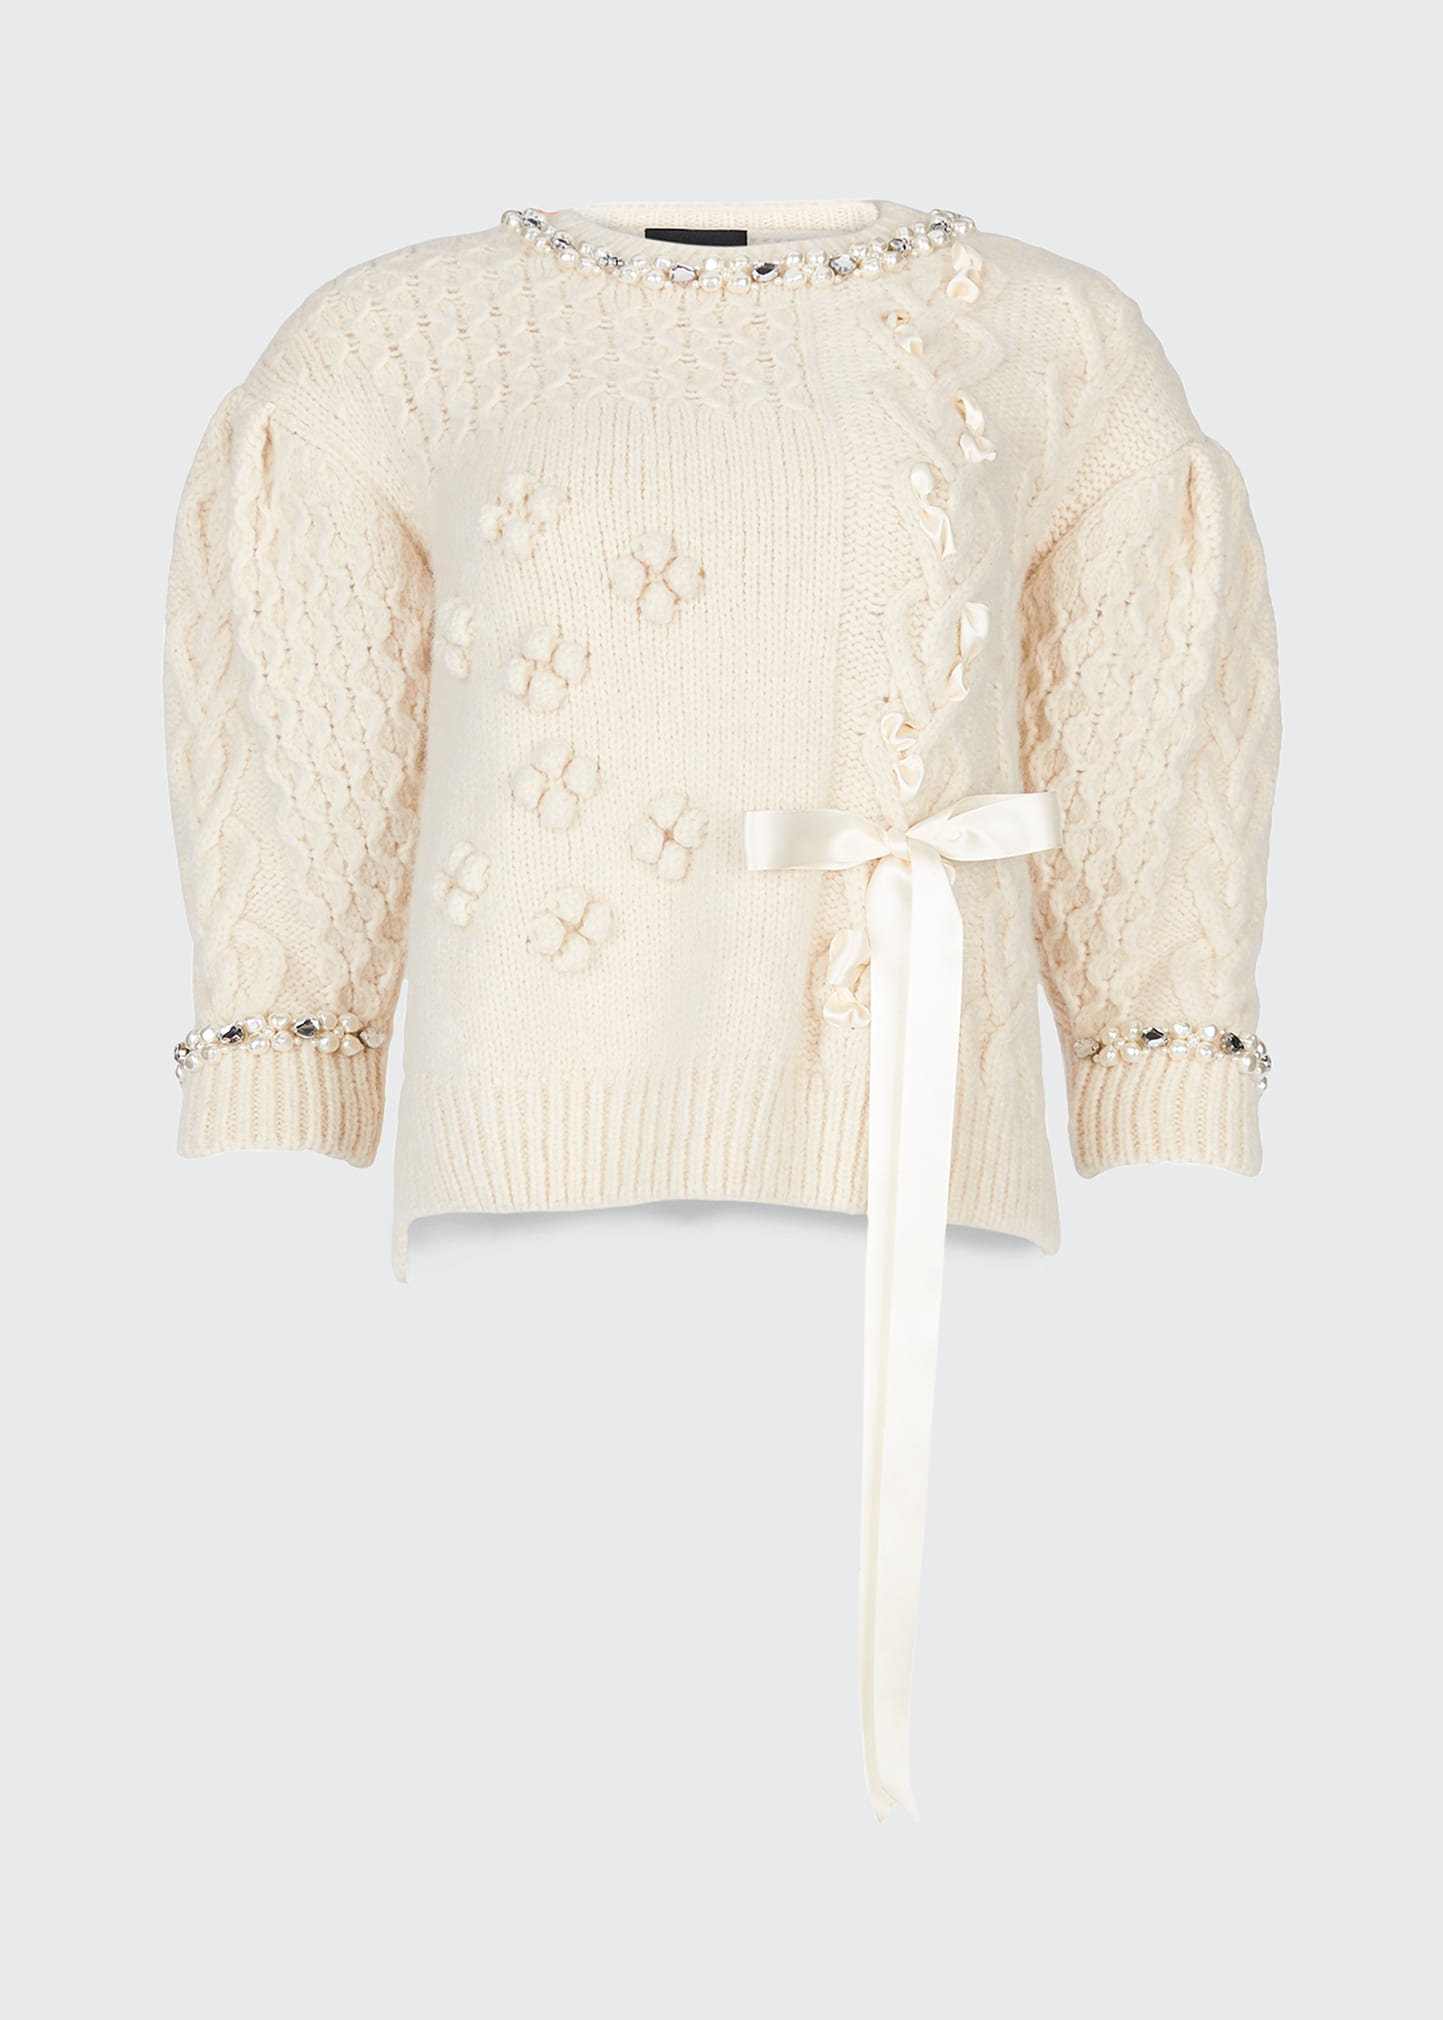 Simone Rocha Ribbon & Bead Embellished Patchwork Pullover